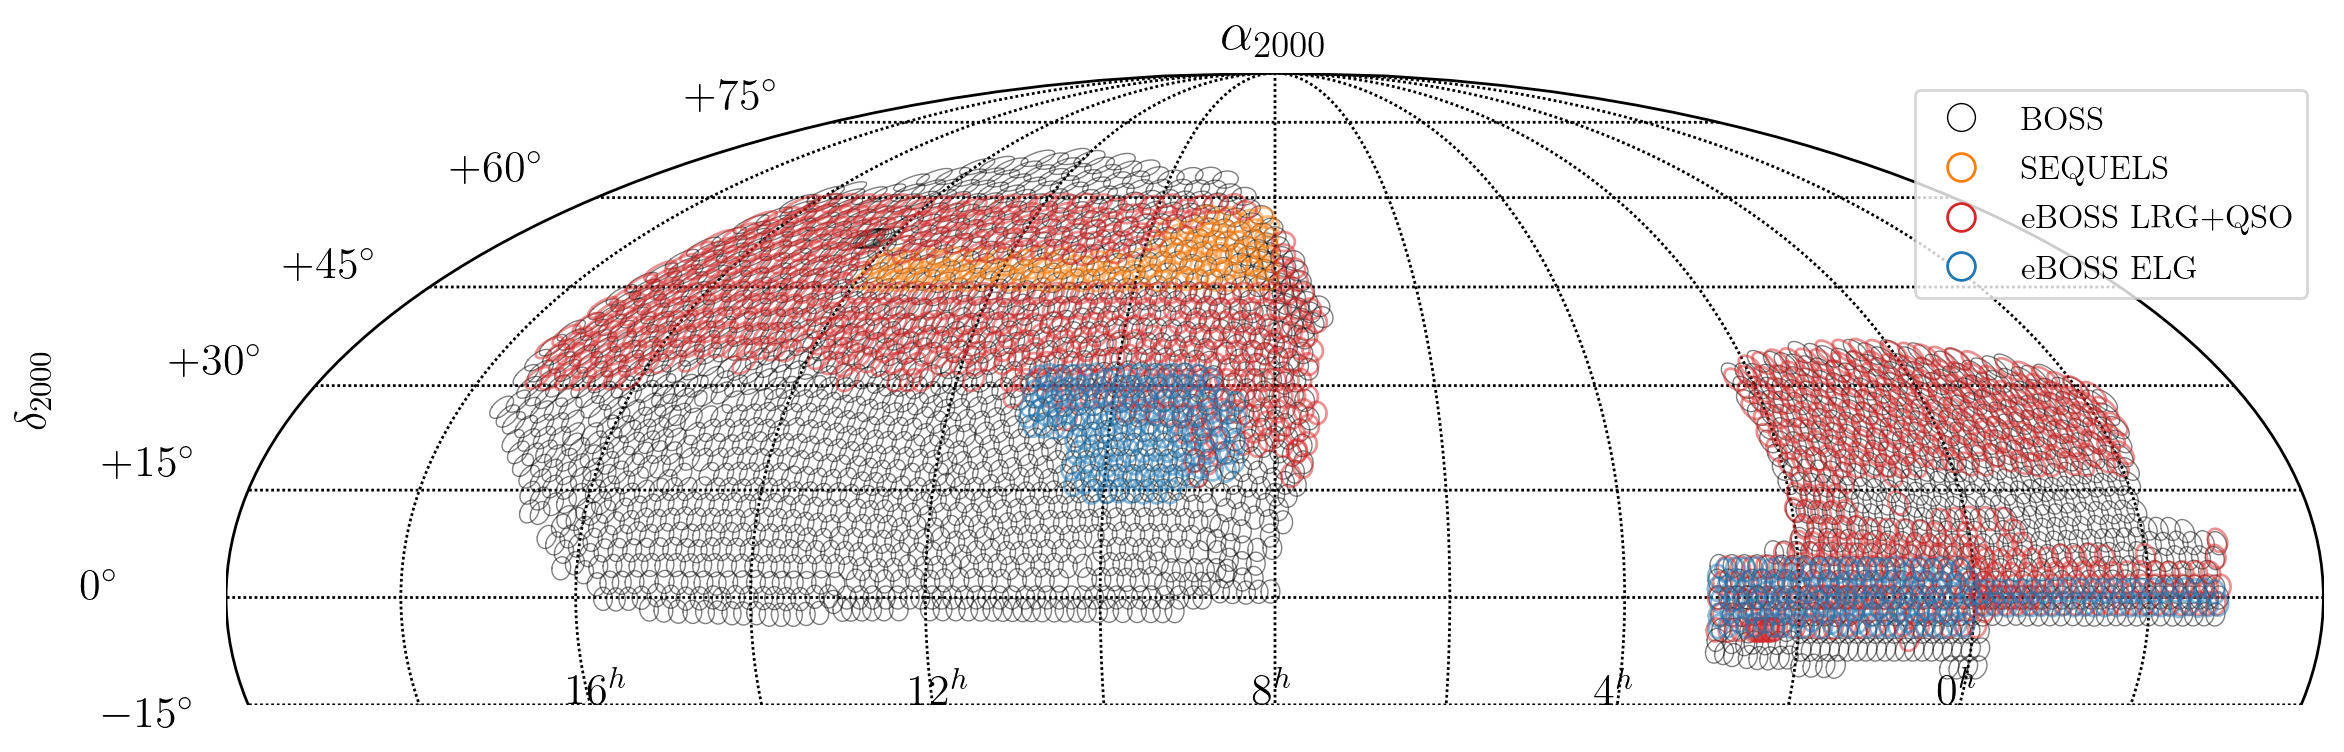 DR16 eBOSS spectroscopic coverage in Equatorial coordinates (plot centered at RA = 8h). In DR17, 7 <a href="https://www.sdss4.org/dr17/spectro/special_plates/#eFEDSPlates">eFEDS plates</a> were added to this footprint. 